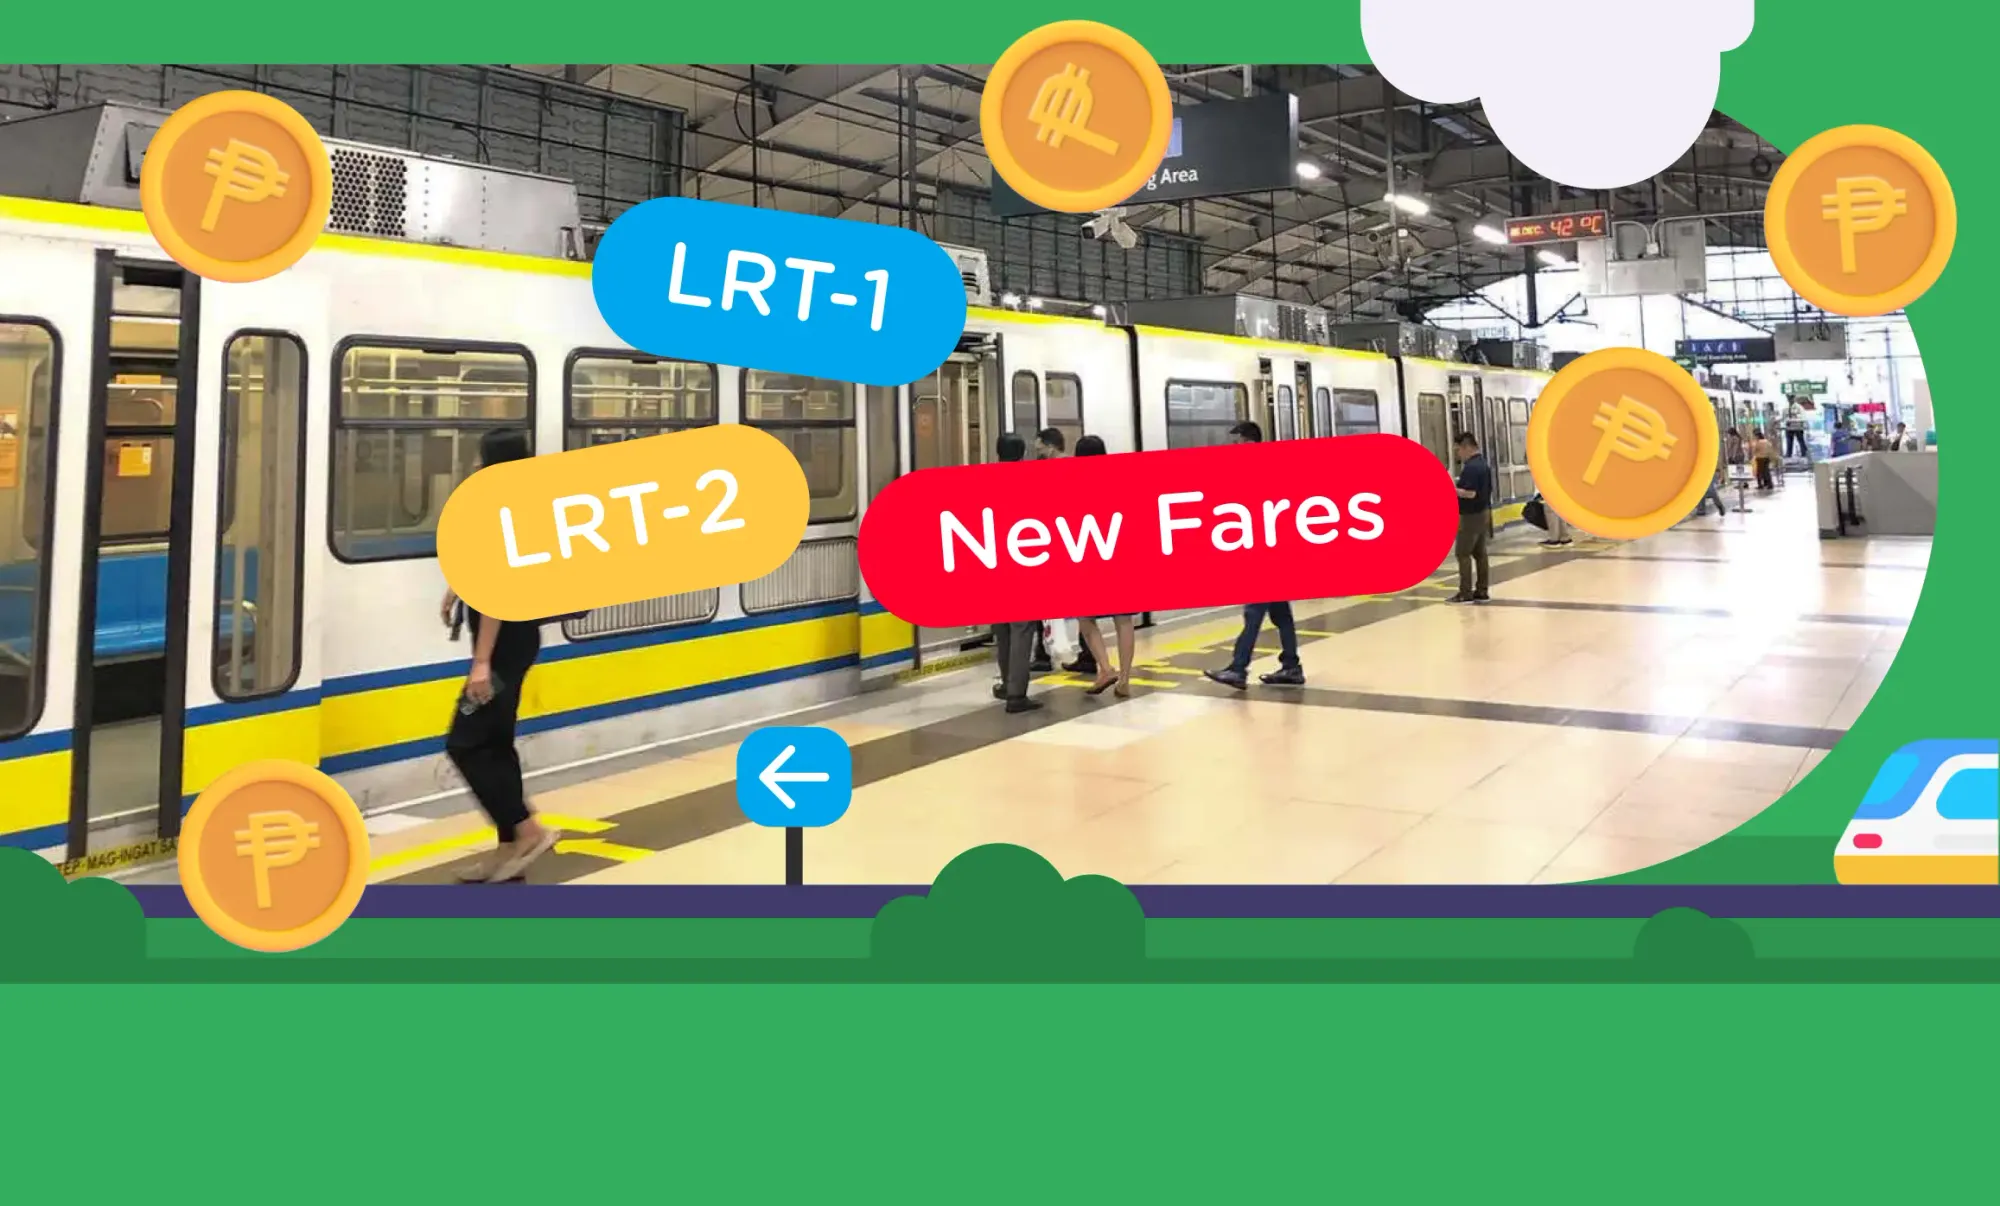 Heads up! Here are the new fares for LRT-1 and LRT-2